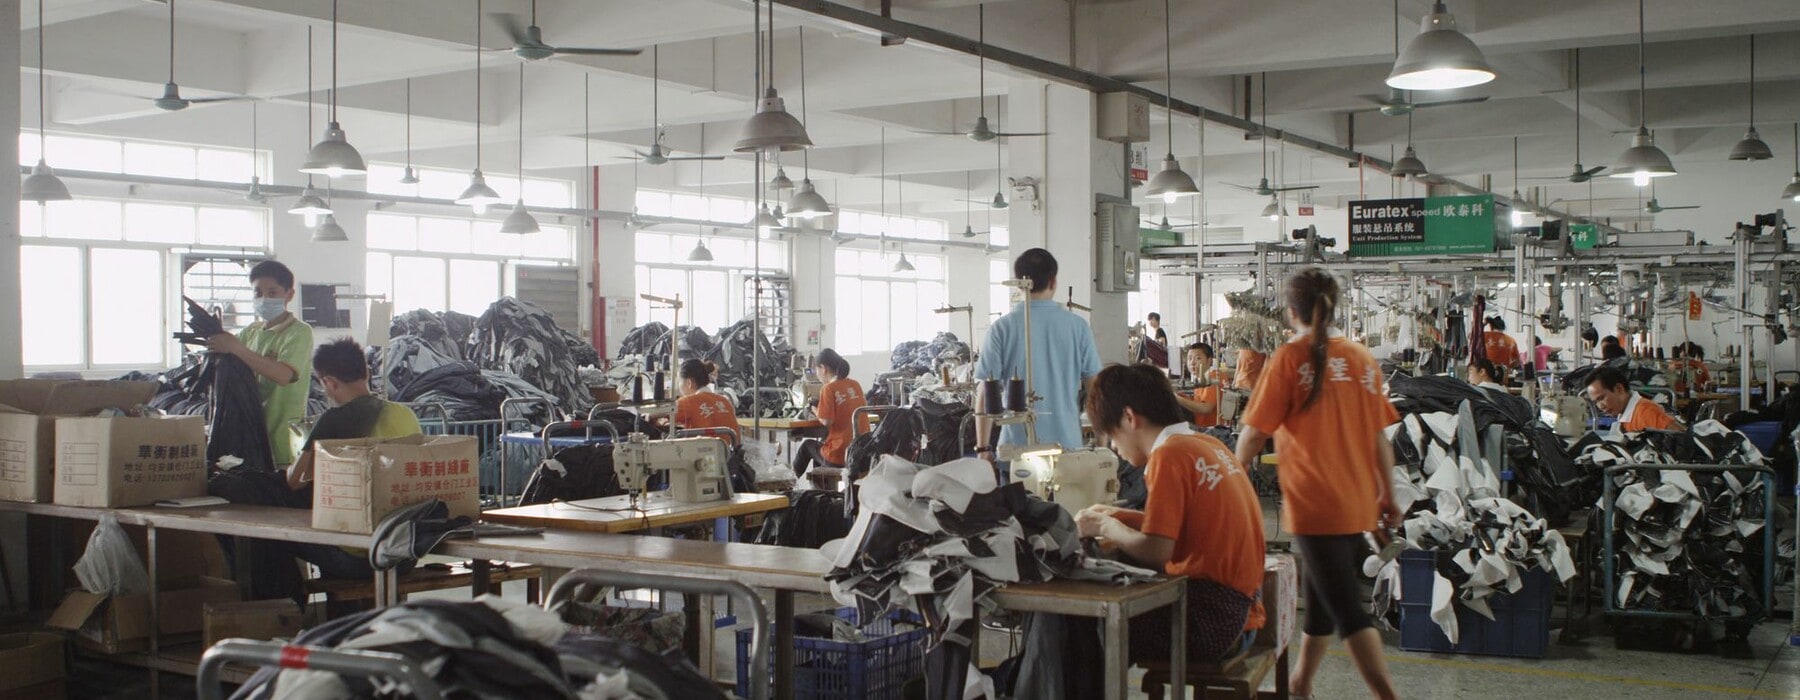 Workers sewing clothes in a factory